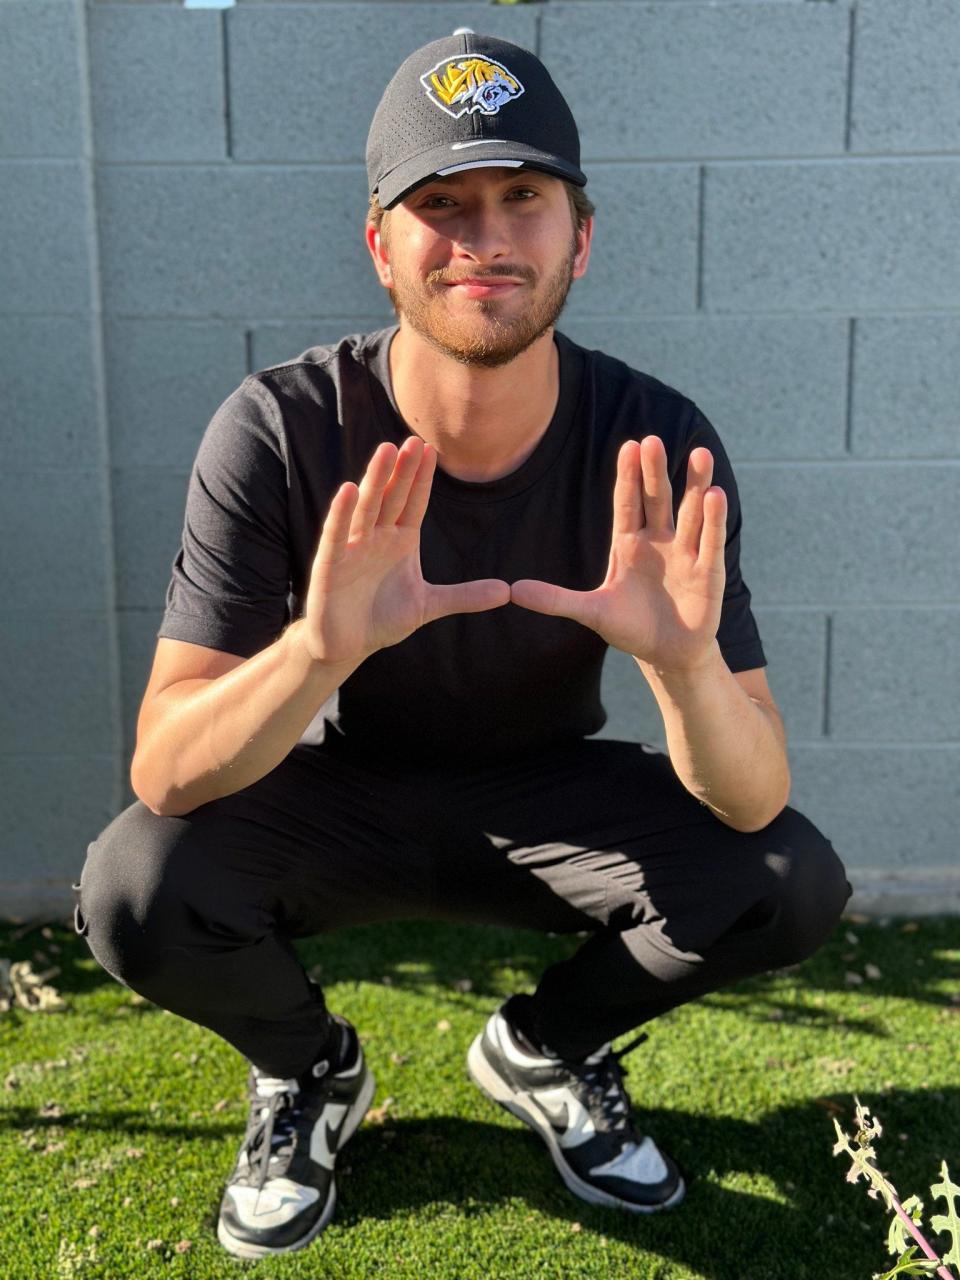 Cole Topham poses a photo after announcing his hire as an offensive analyst and creative director at Saguaro High School.